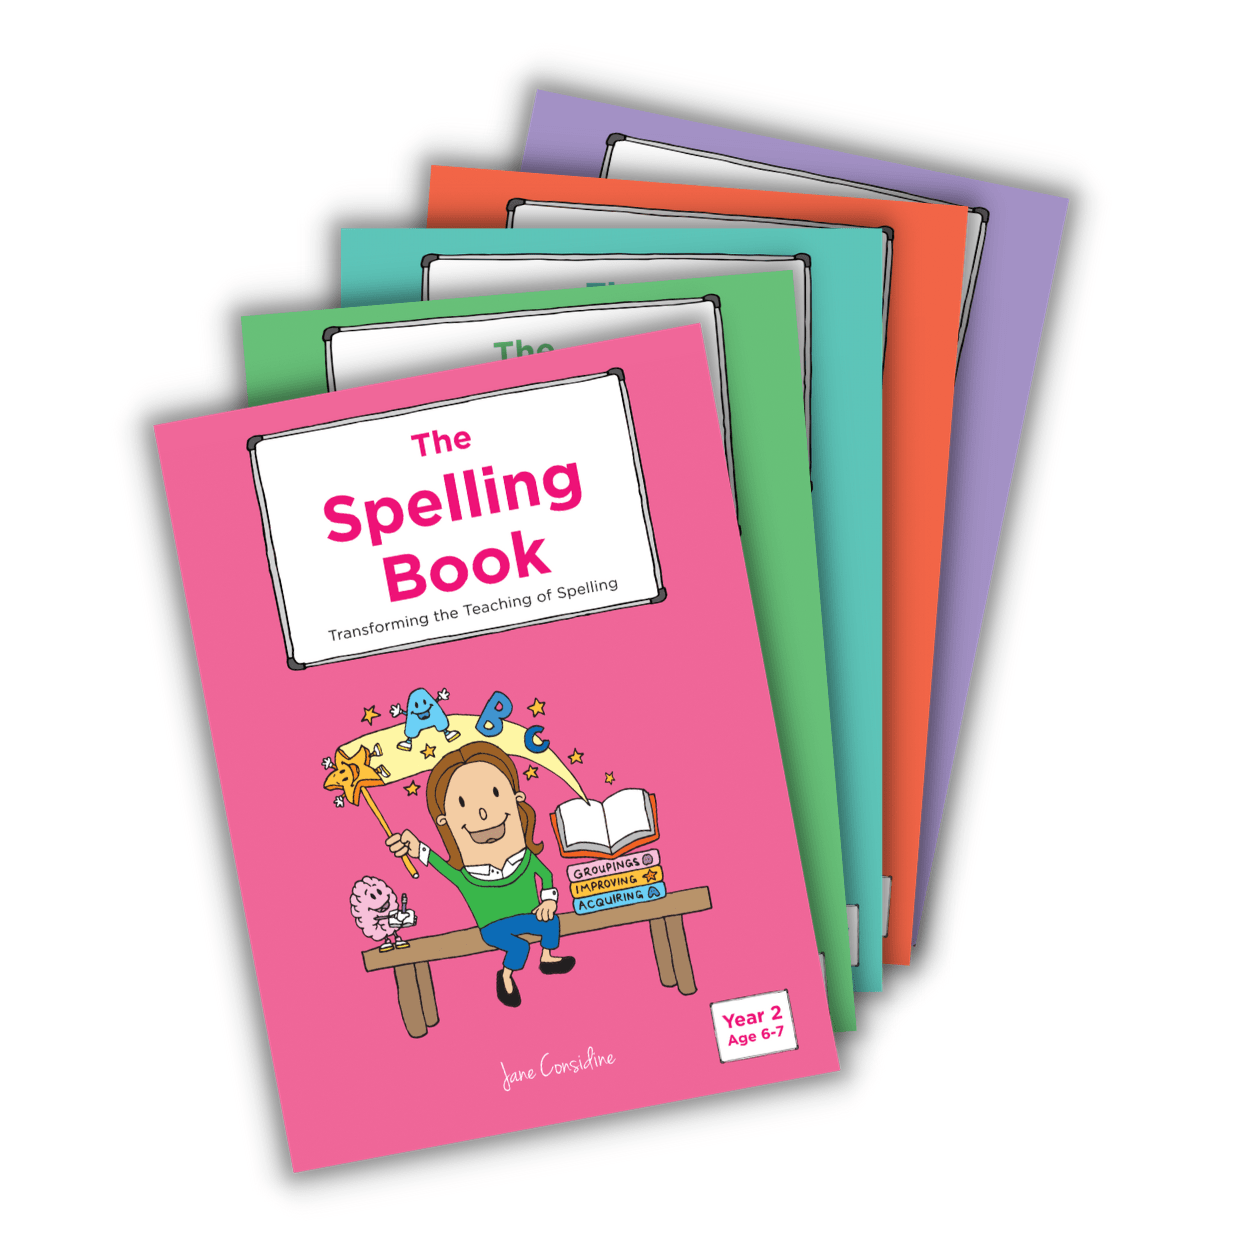 The Spelling Book by Jane Considine